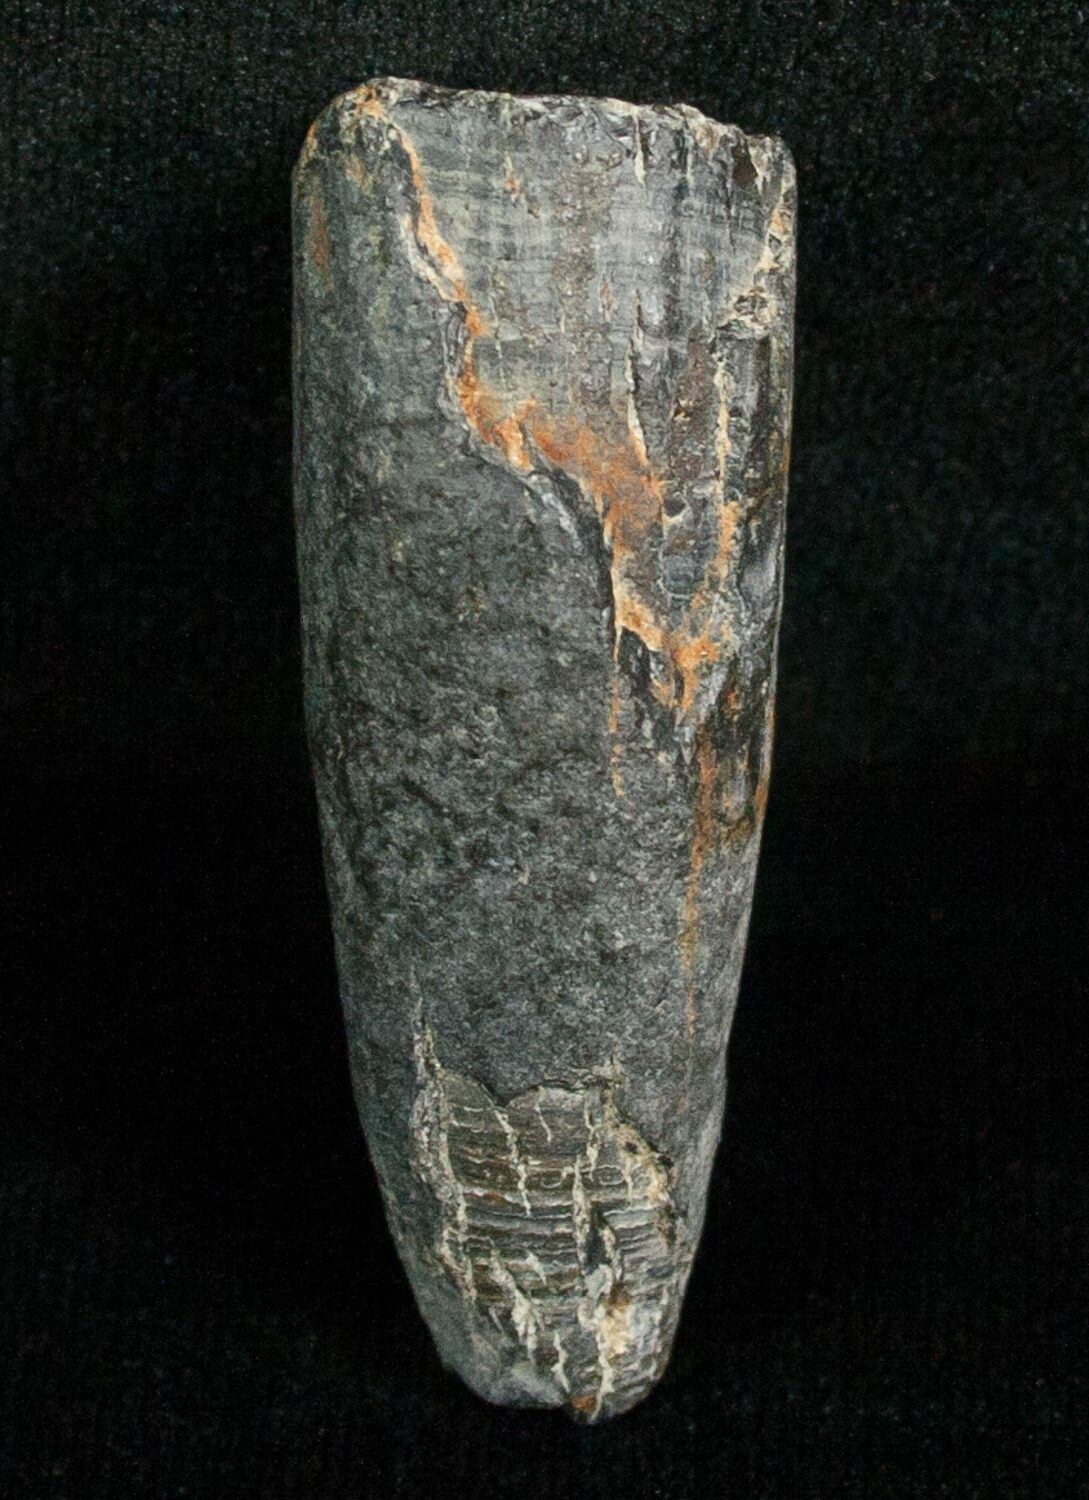 Miocene Aged Fossil Whale Tooth - 1.68" For Sale (#5657) - FossilEra.com